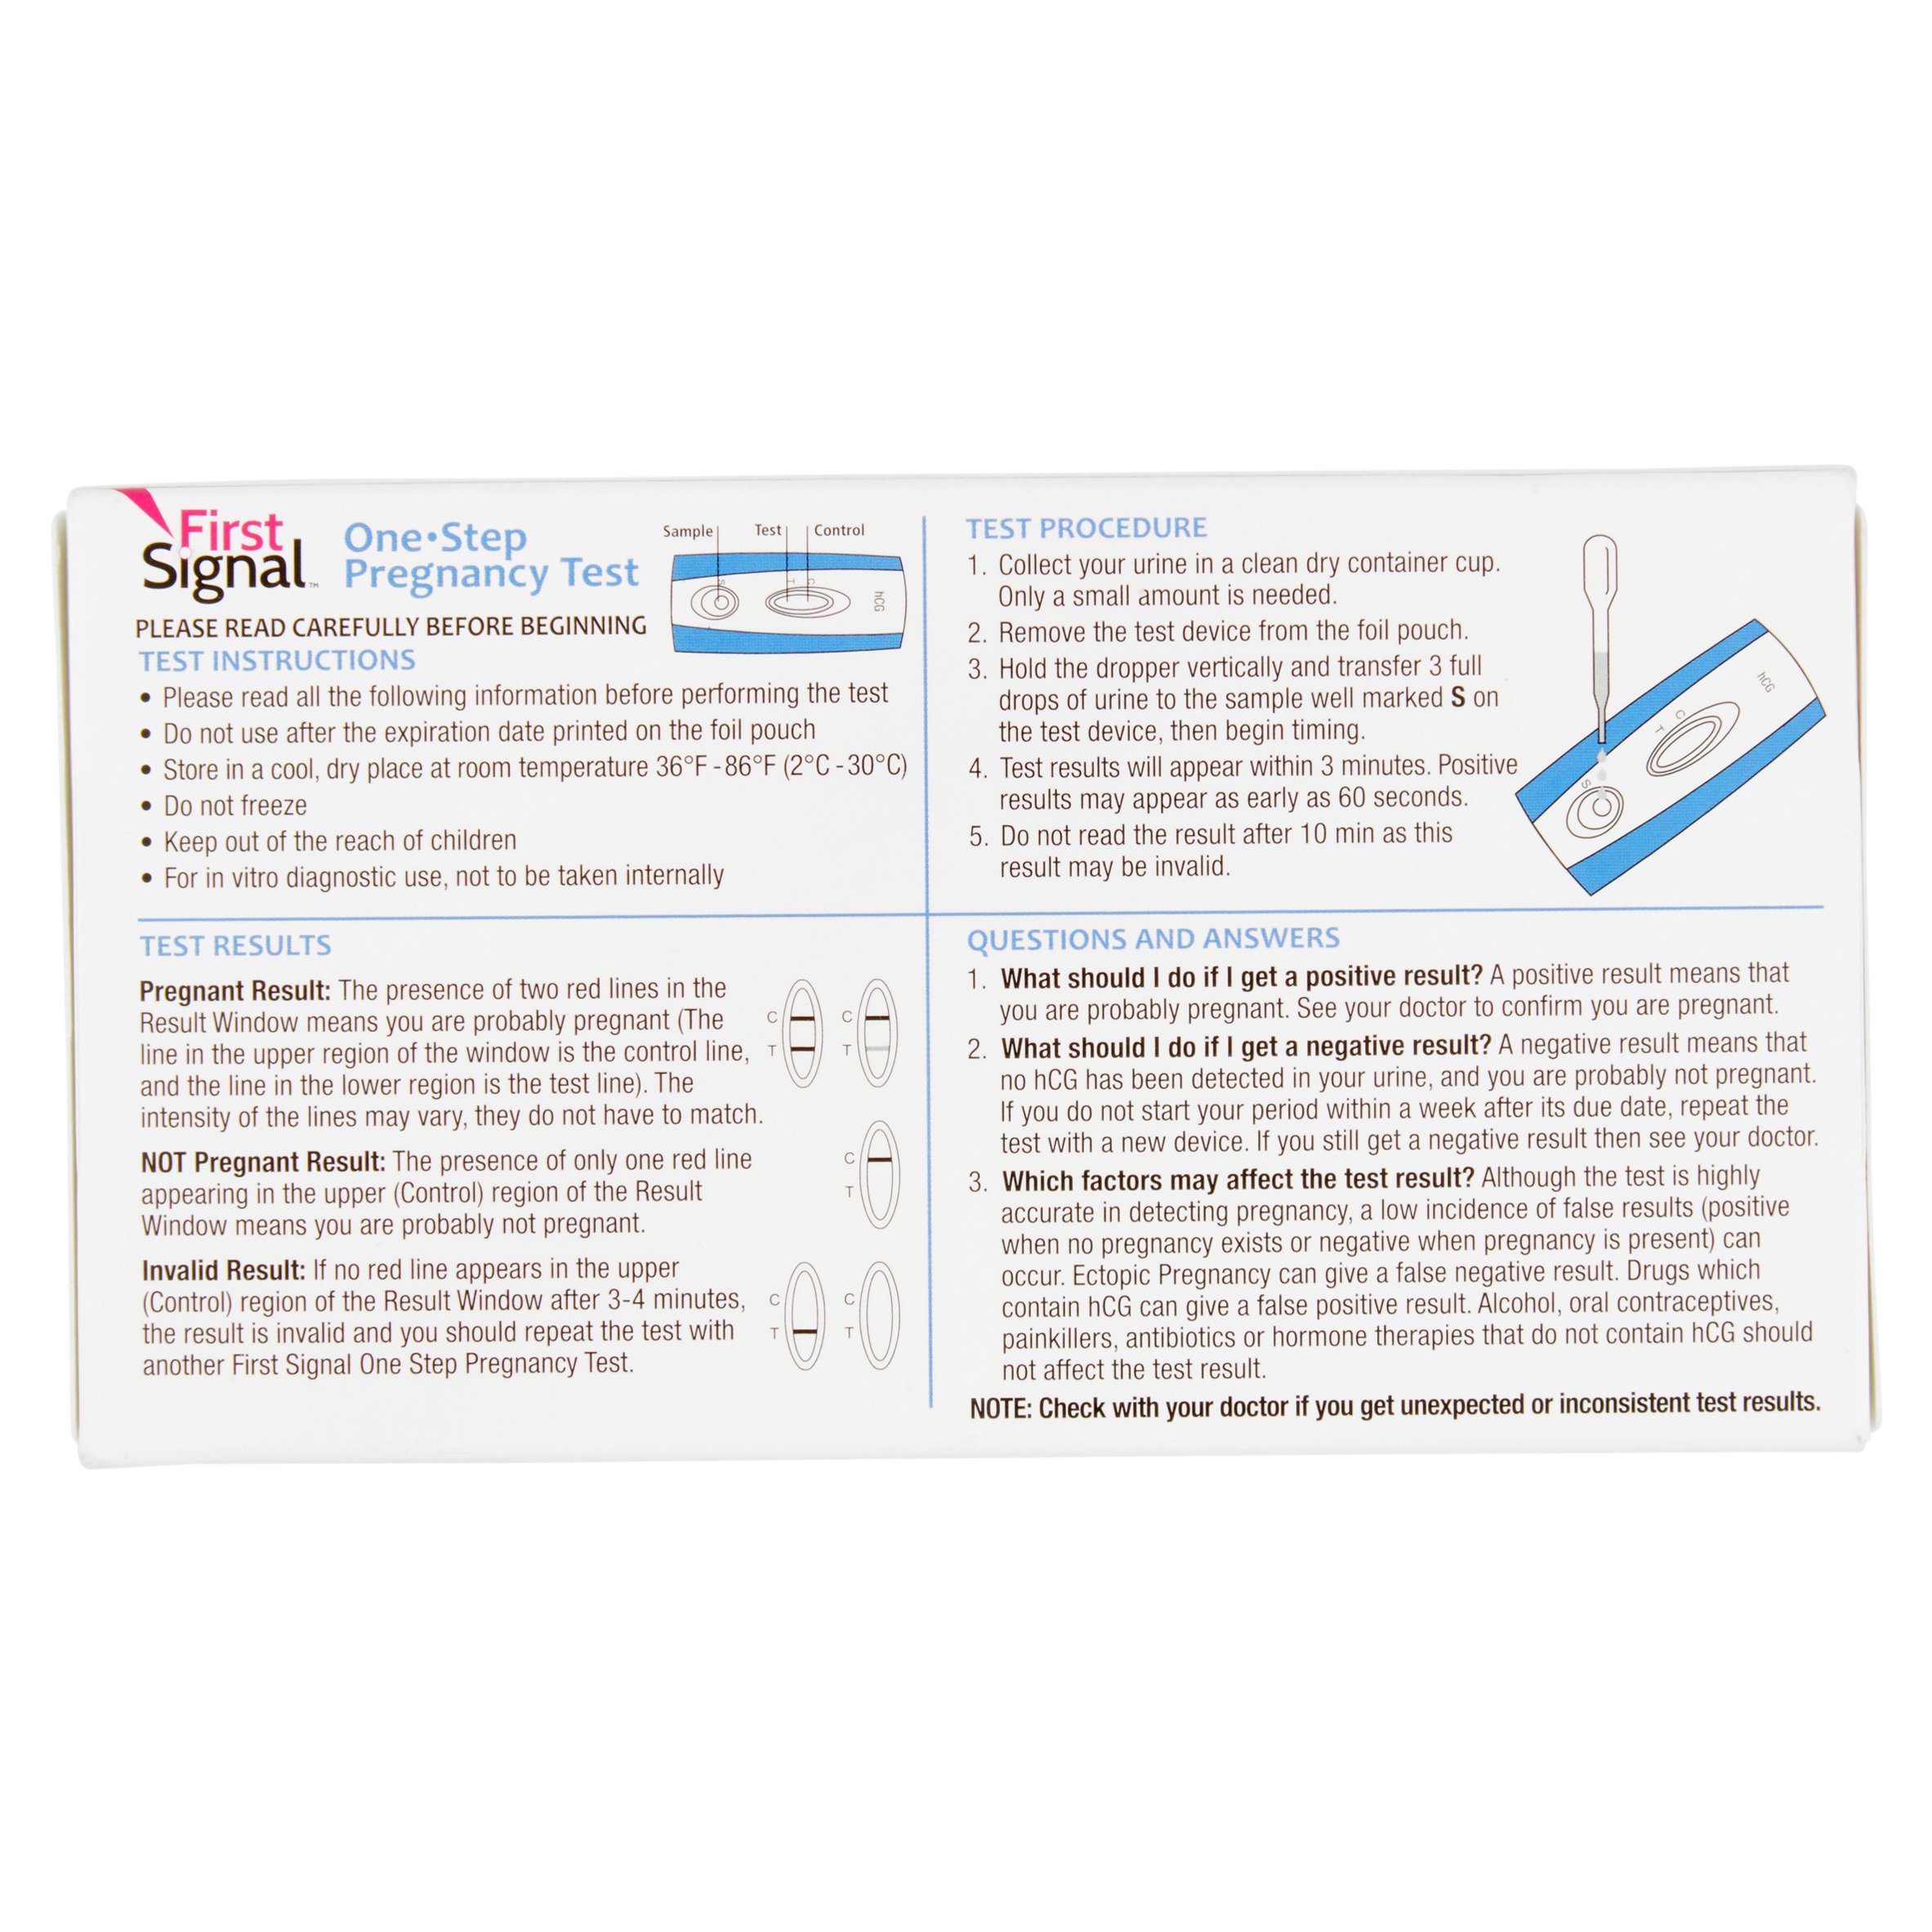 First Signal One-Step Pregnancy Test - image 4 of 5